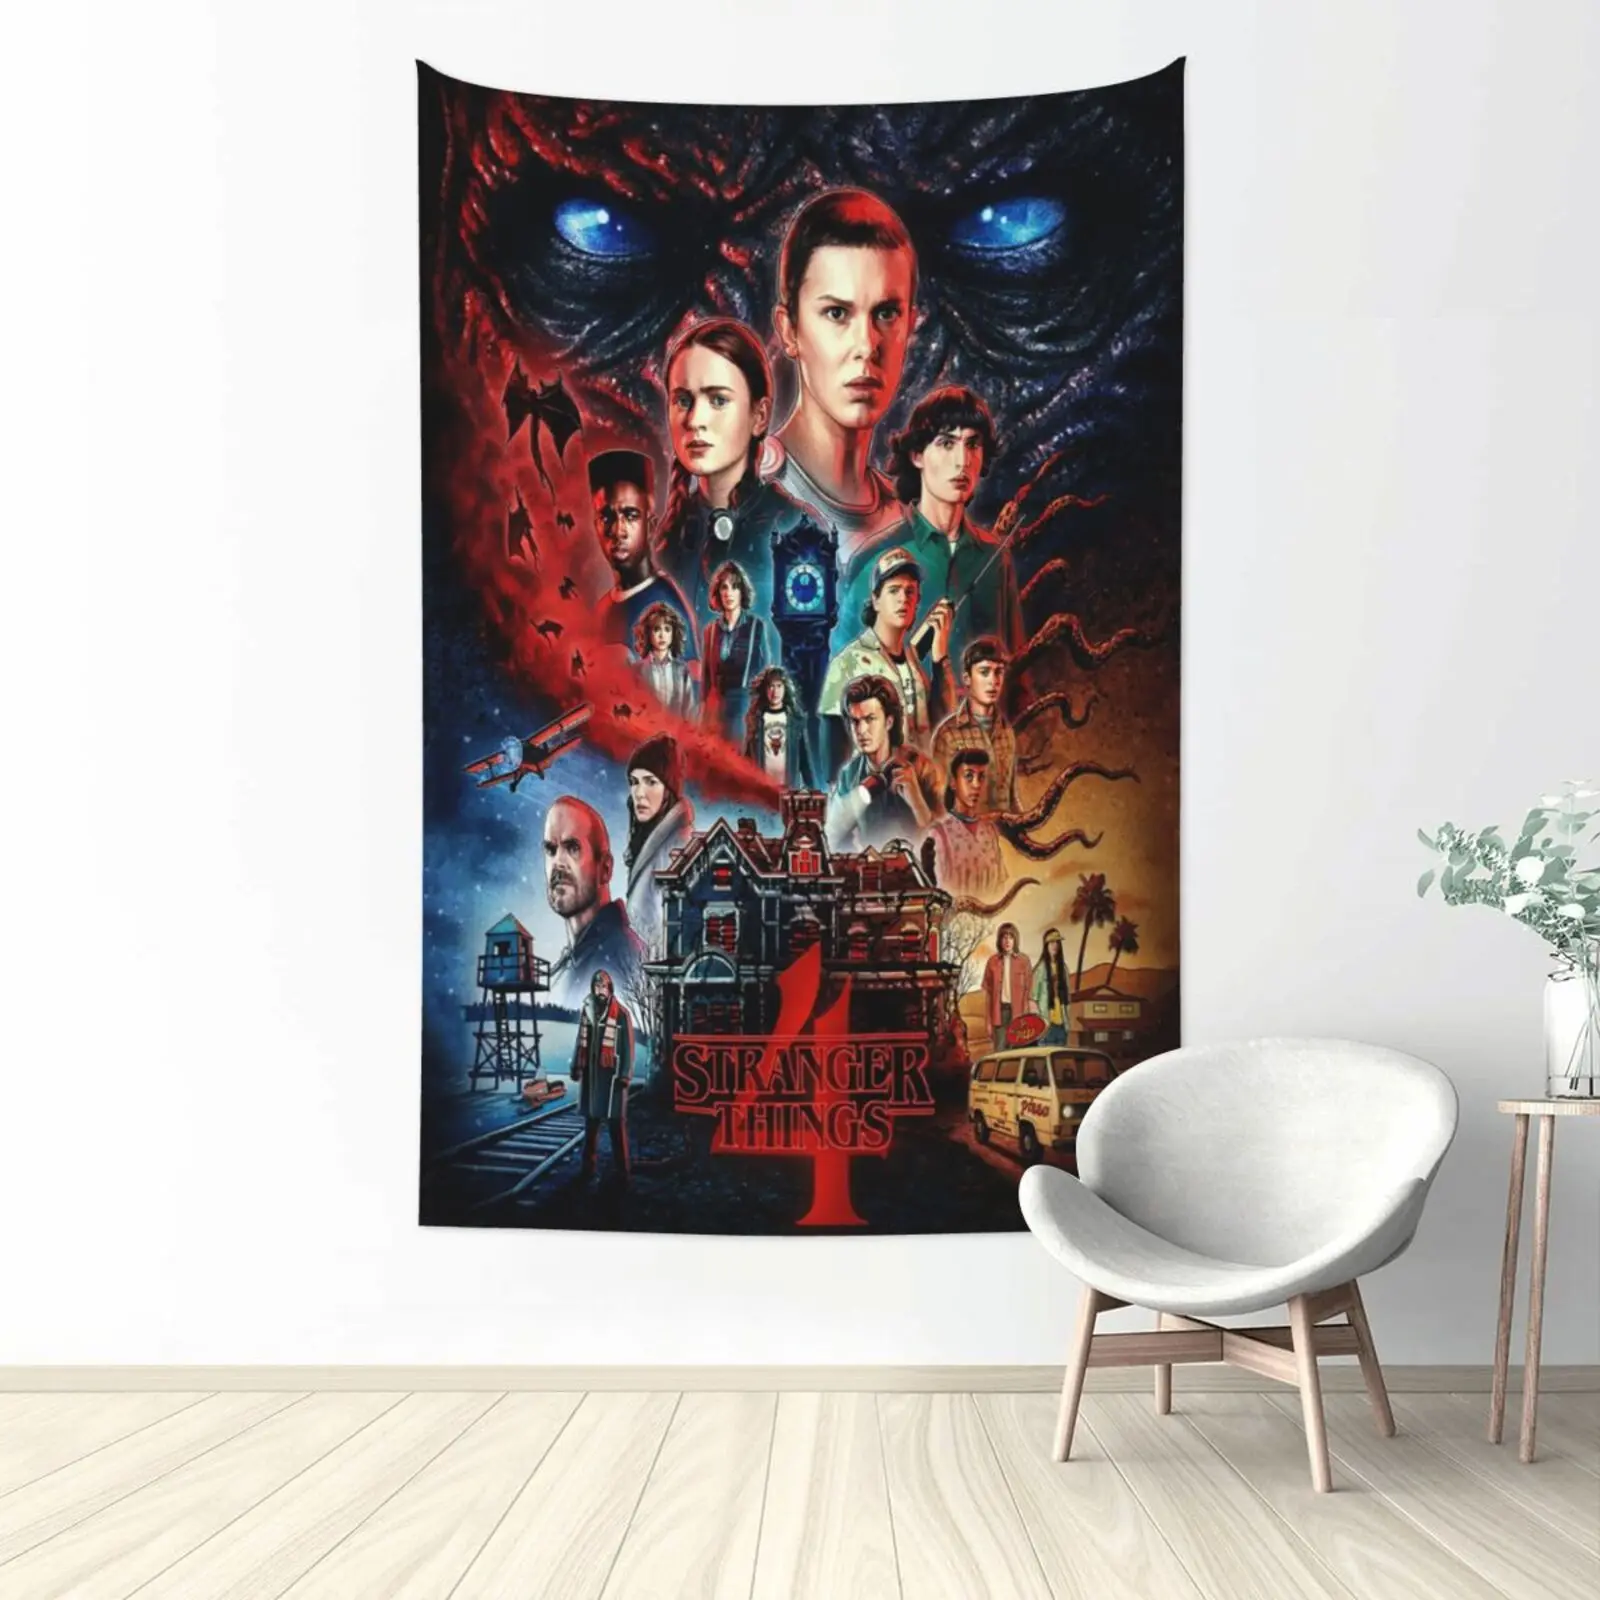 

2022 Hot New TV Show Movie Stranger Things Season 4 To 1 Poster Home Decor Study Bedroom Wall Paintings Picture House Decorative